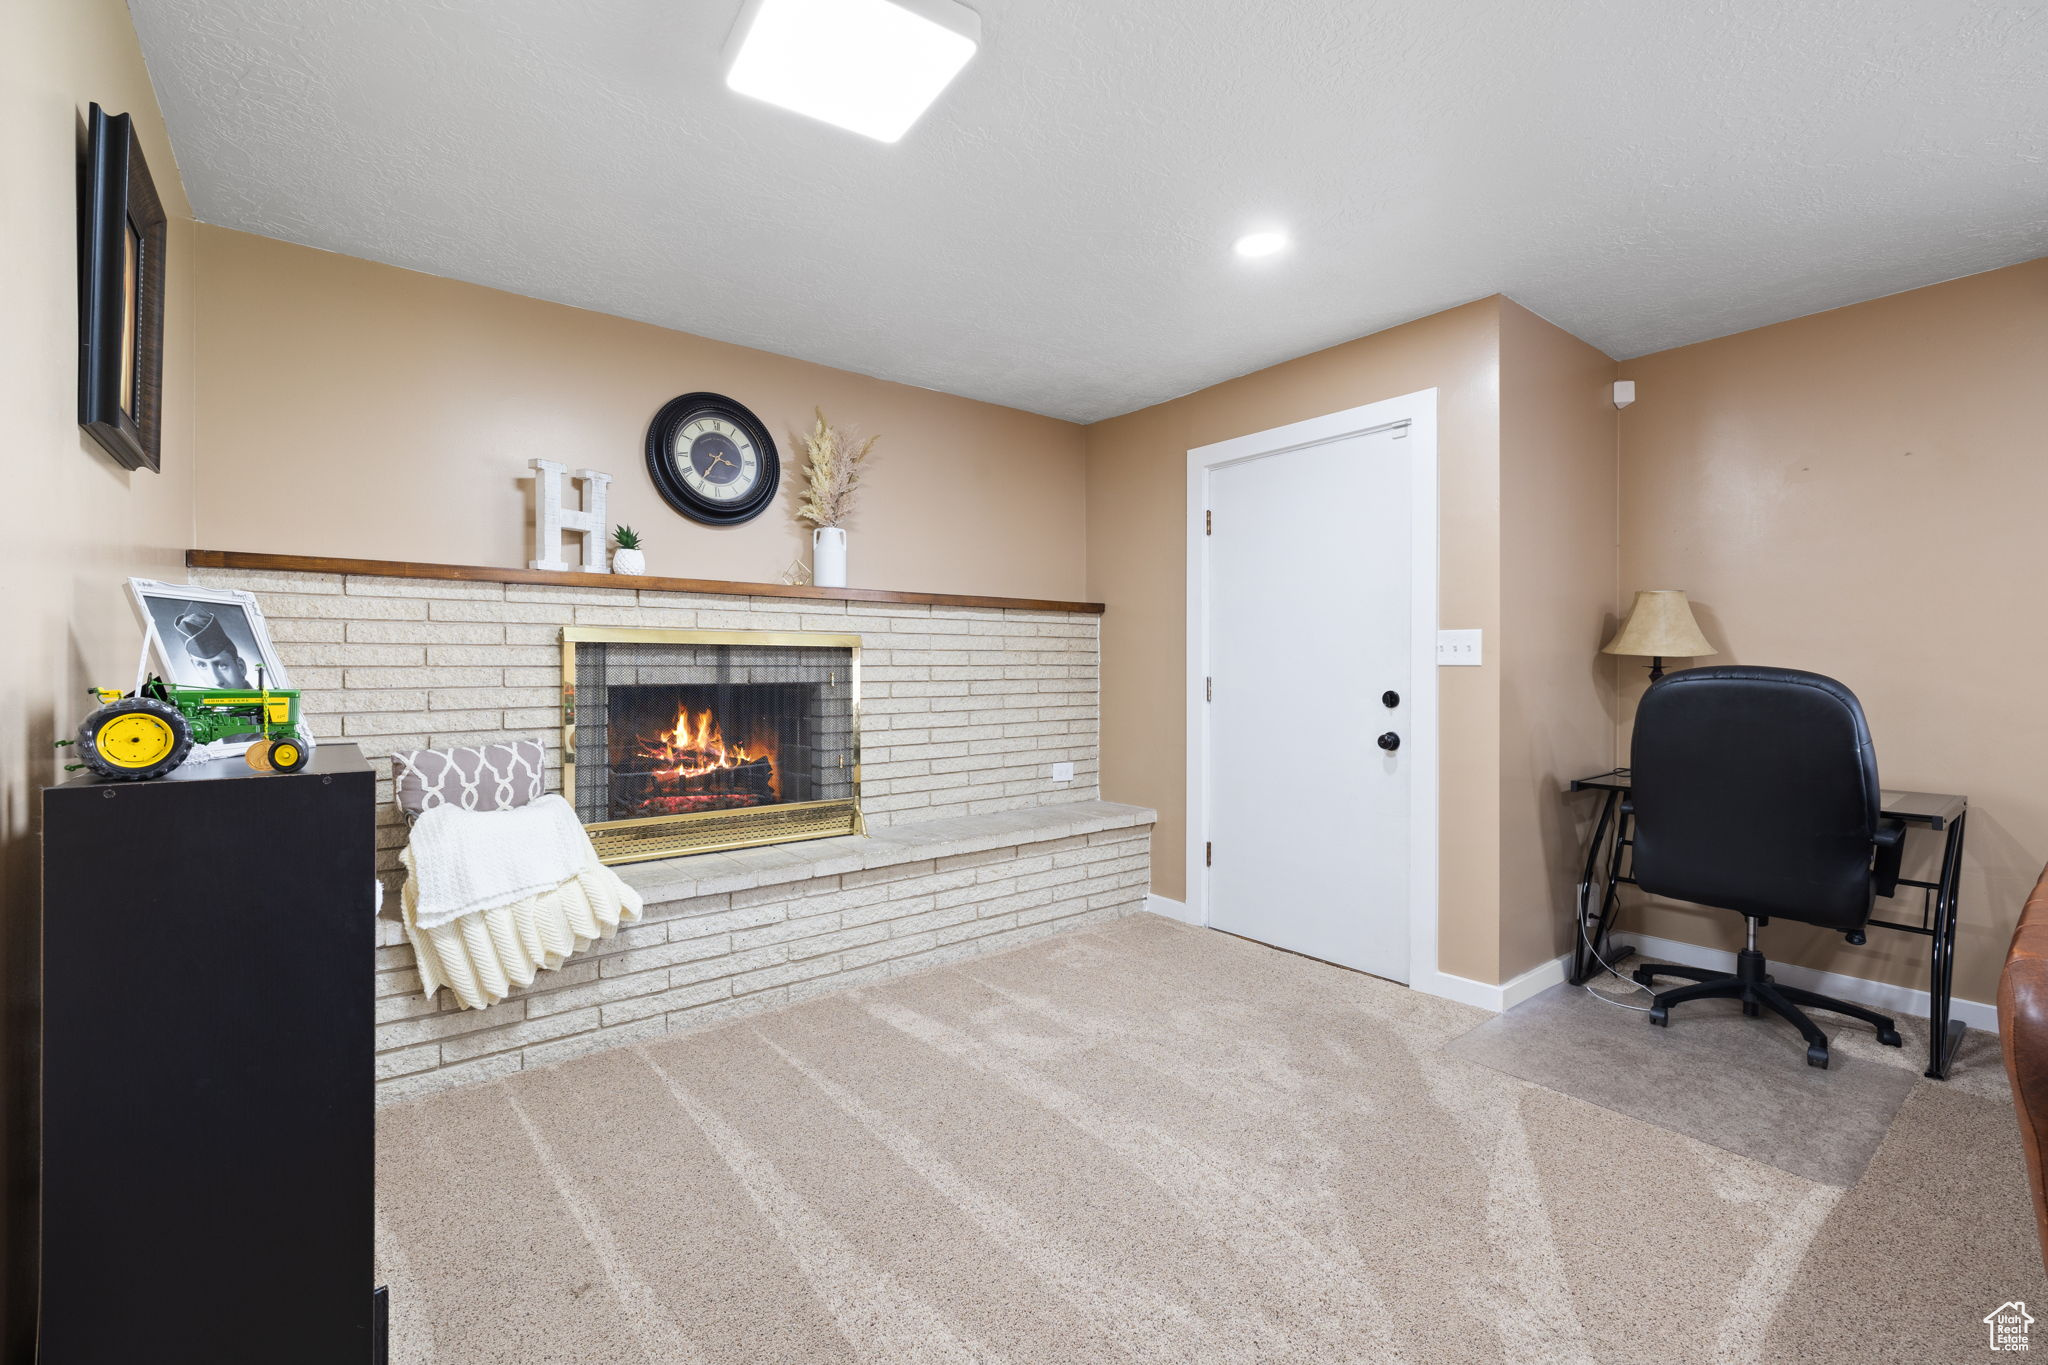 Carpeted office space featuring a brick fireplace